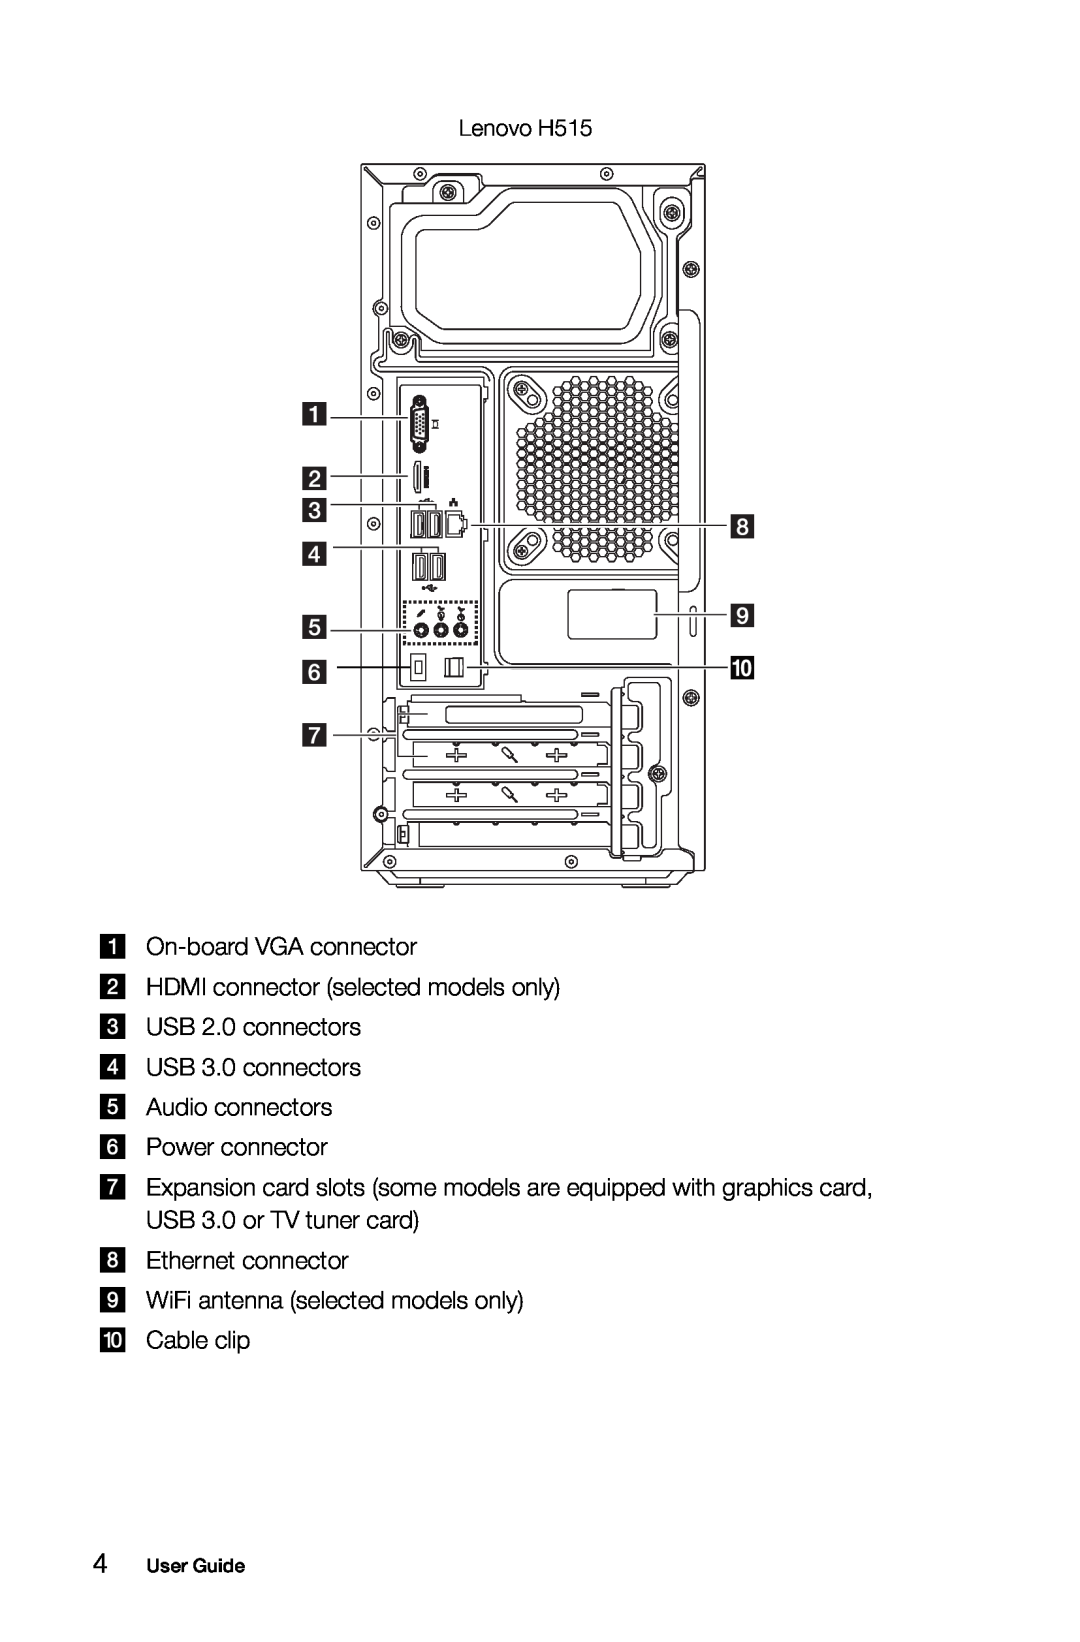 Lenovo 57321302 On-board VGA connector, HDMI connector selected models only USB 2.0 connectors, Lenovo H515, User Guide 